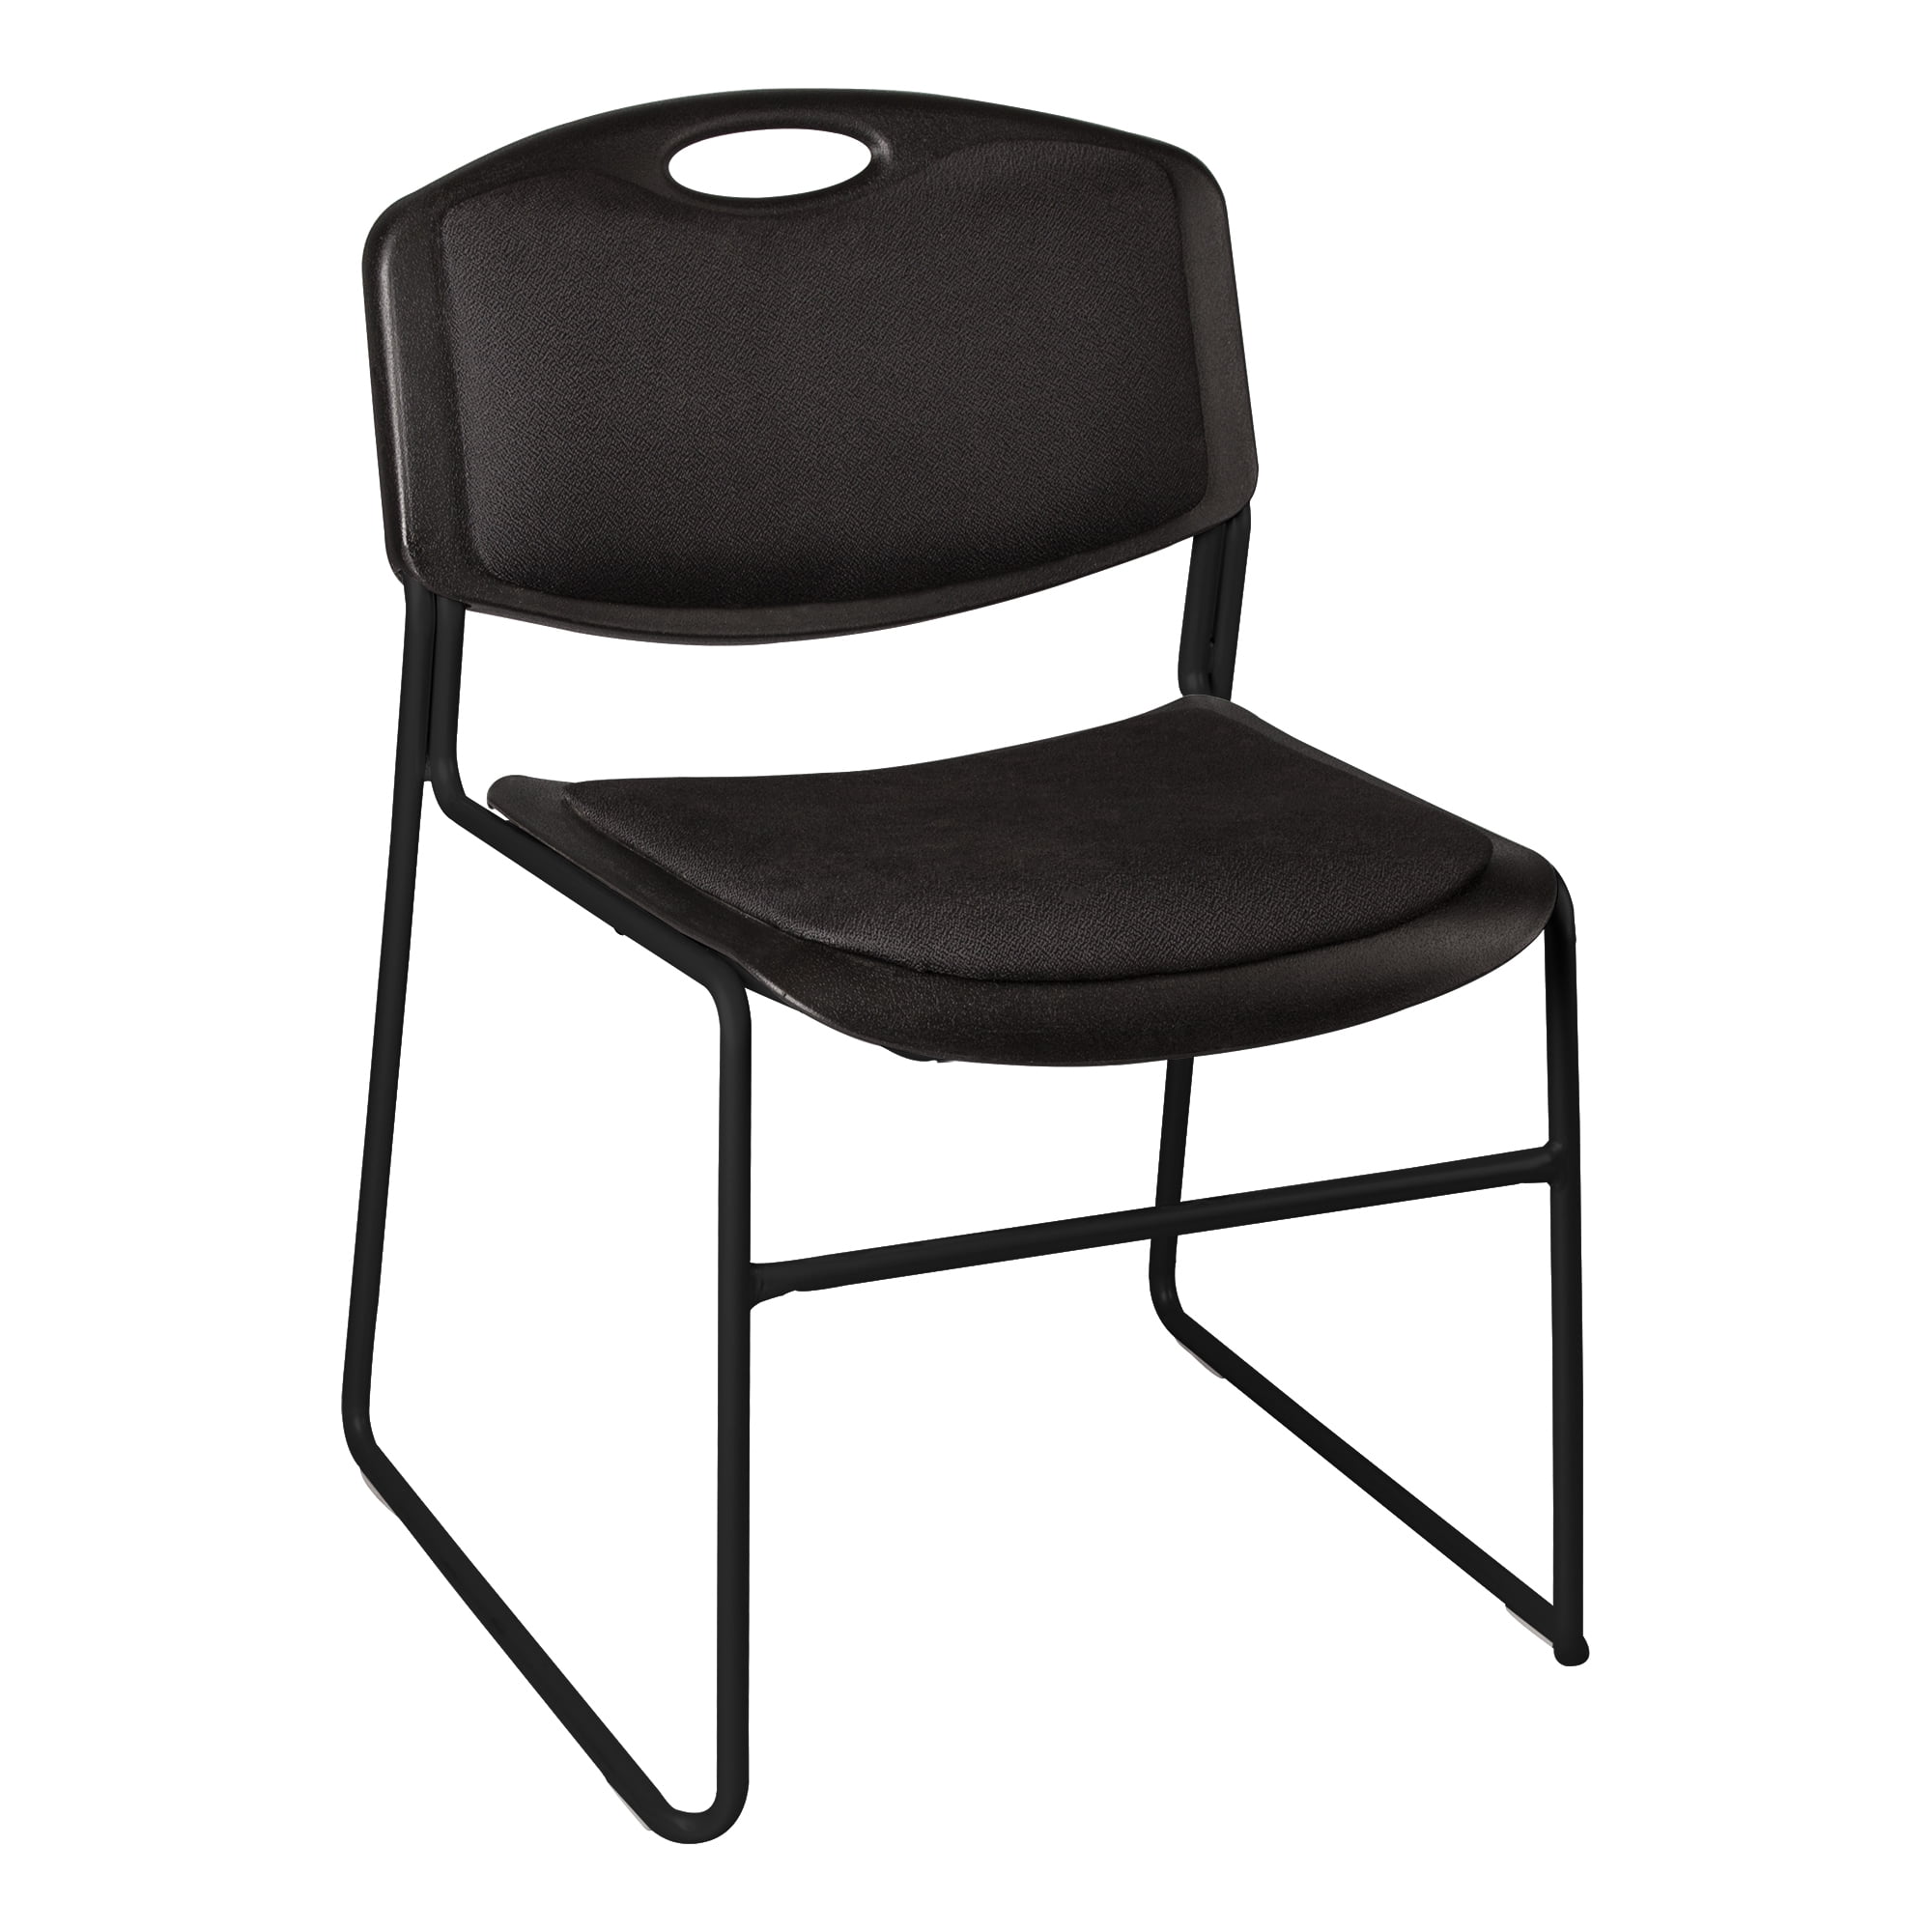 Norwood Commercial Furniture HeavyDuty Plastic Stacking Chair with Padded Seat and Back (Pack